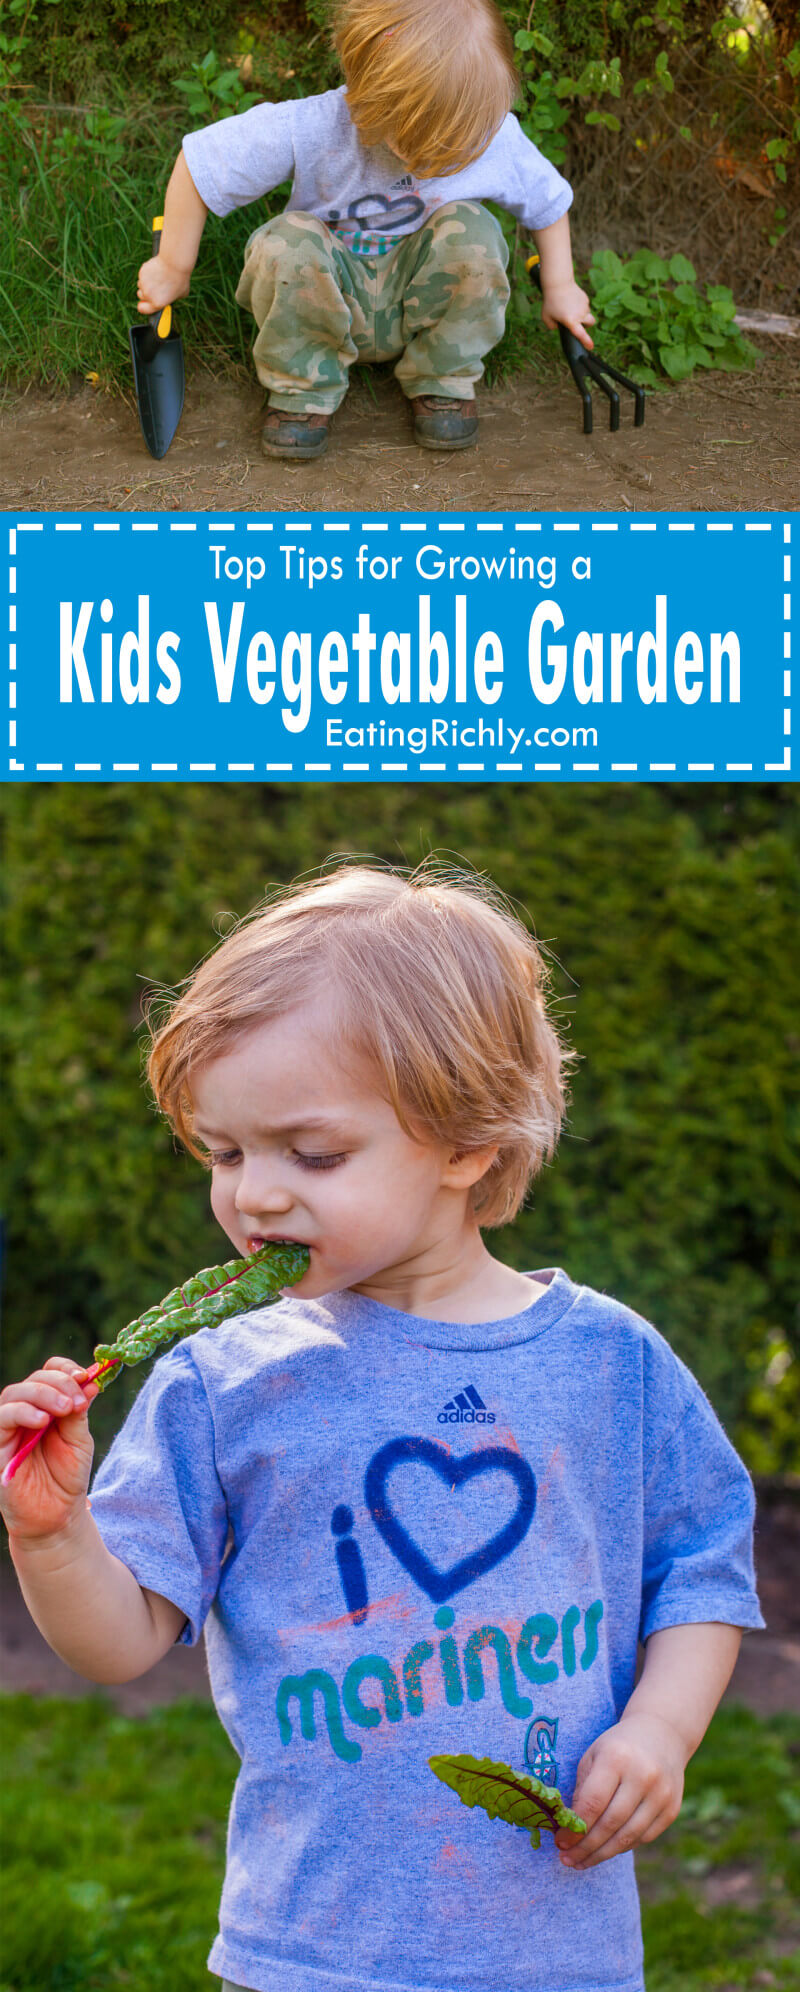 Teach your kids to love cooking and eating healthy food by getting them in the garden. Get more tips for growing a kids' vegetable garden at EatingRichly.com